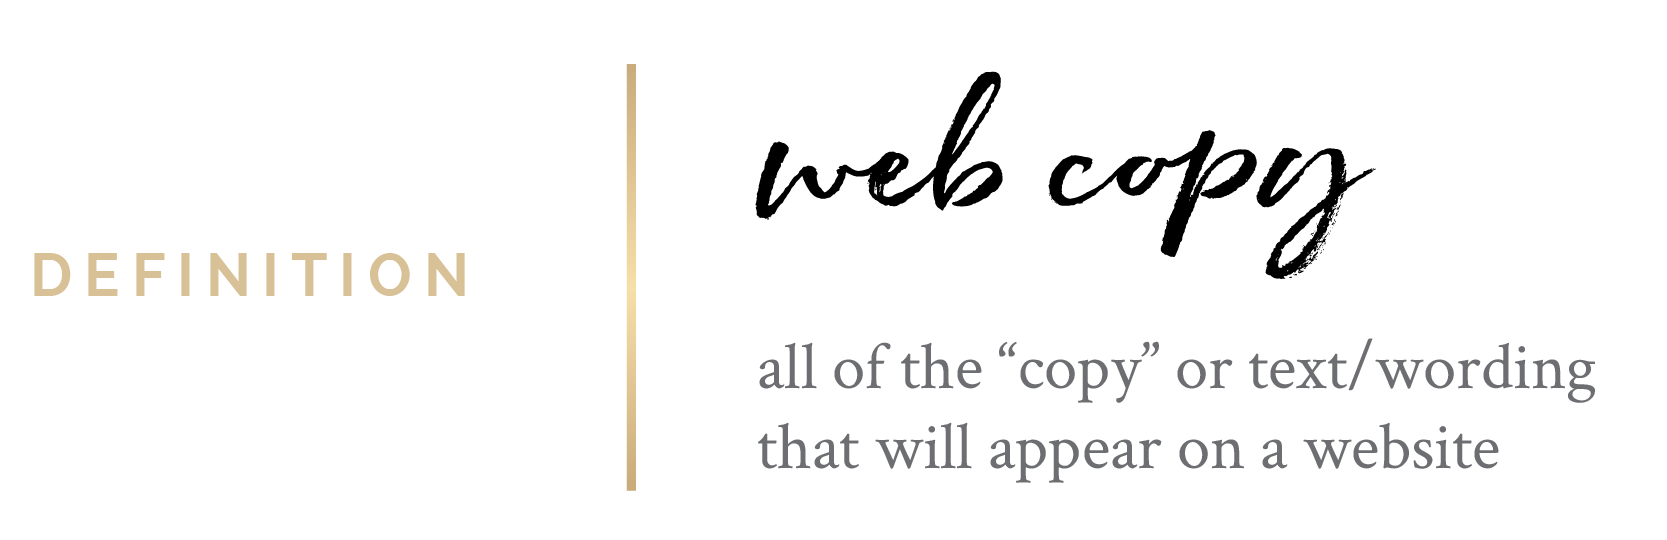 Definition: Web Copy | Branding and marketing terms from brand designer Moriah Riona